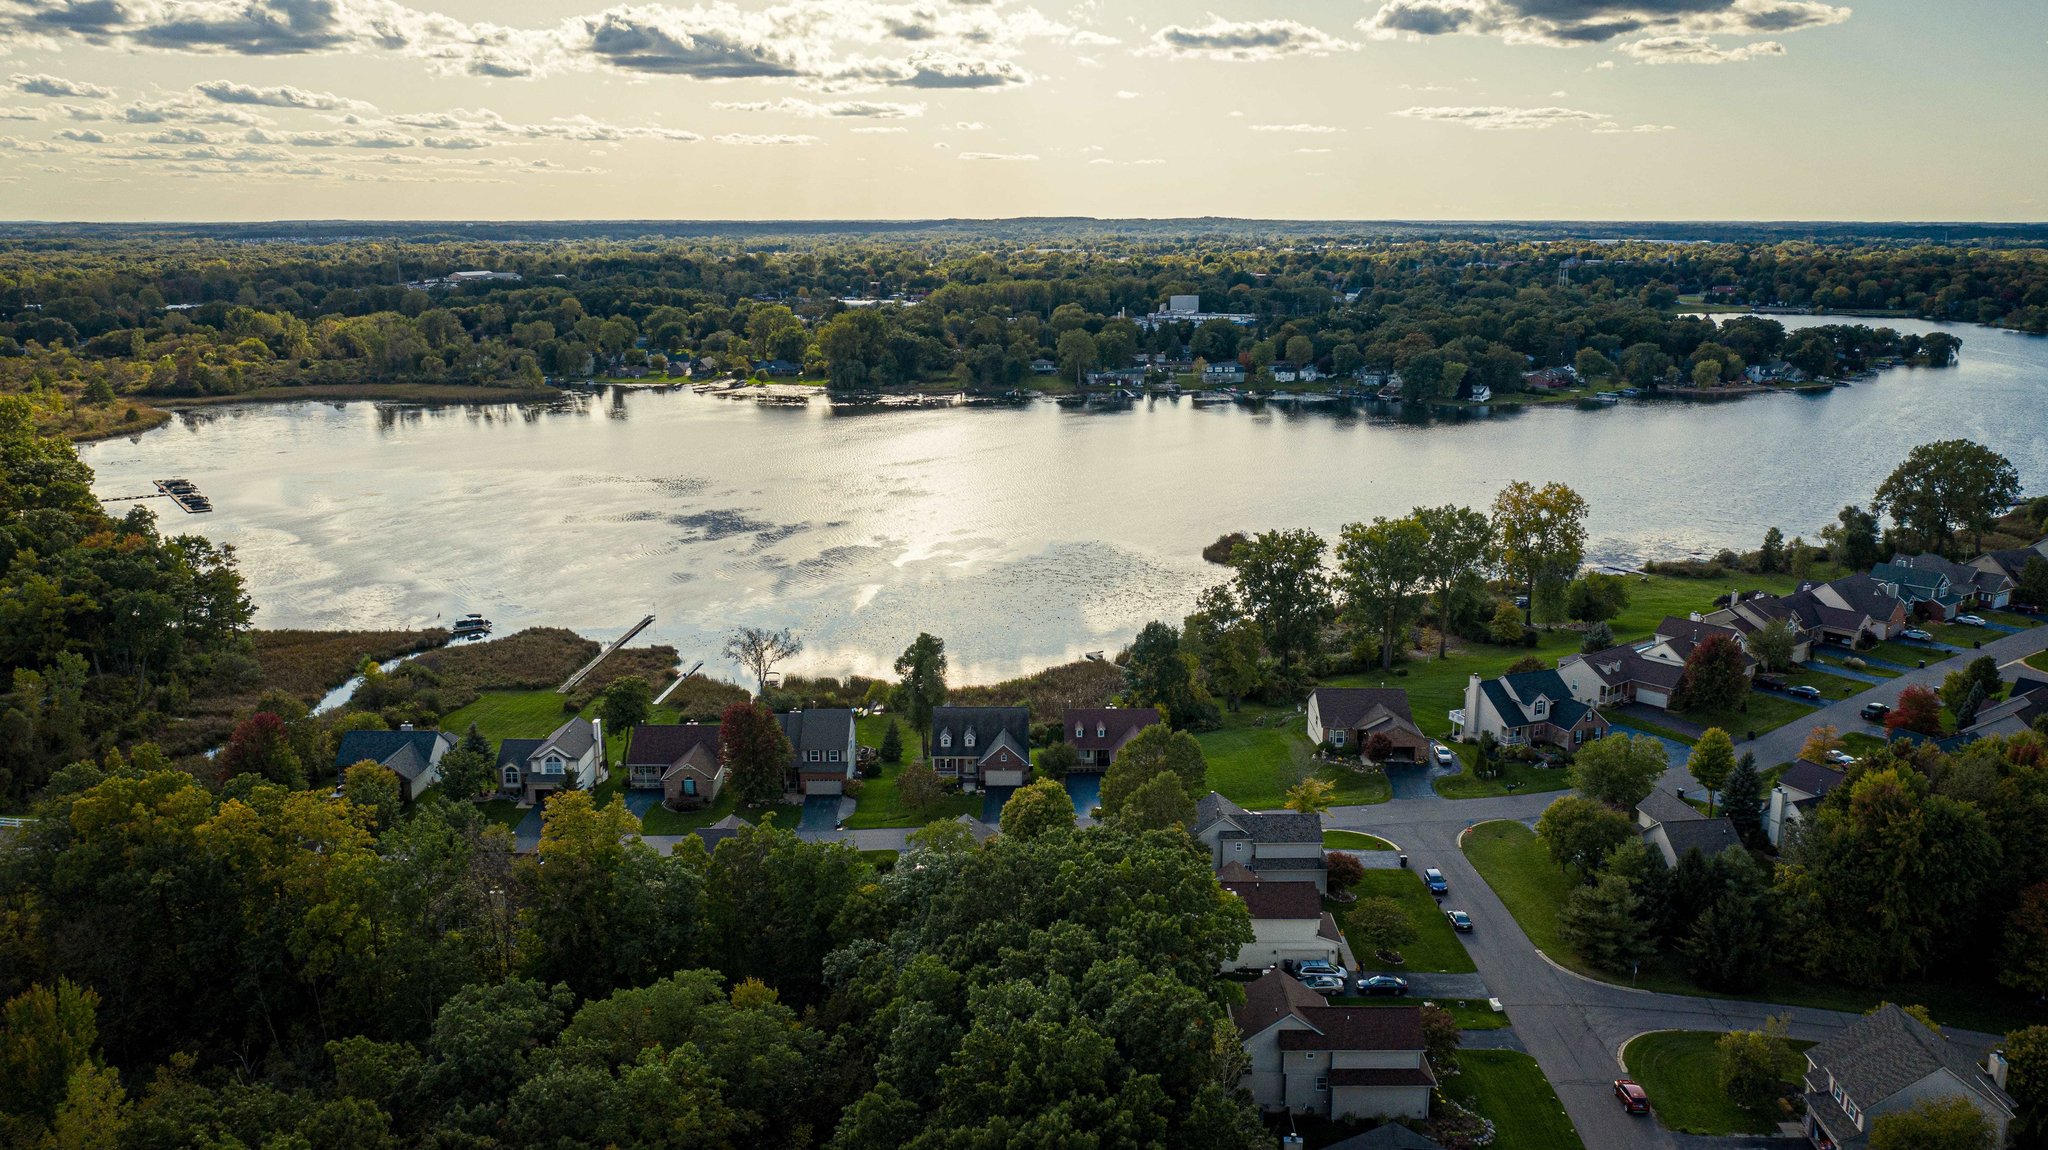 View of the Lakeshore Pointe neighborhood lake at dawn